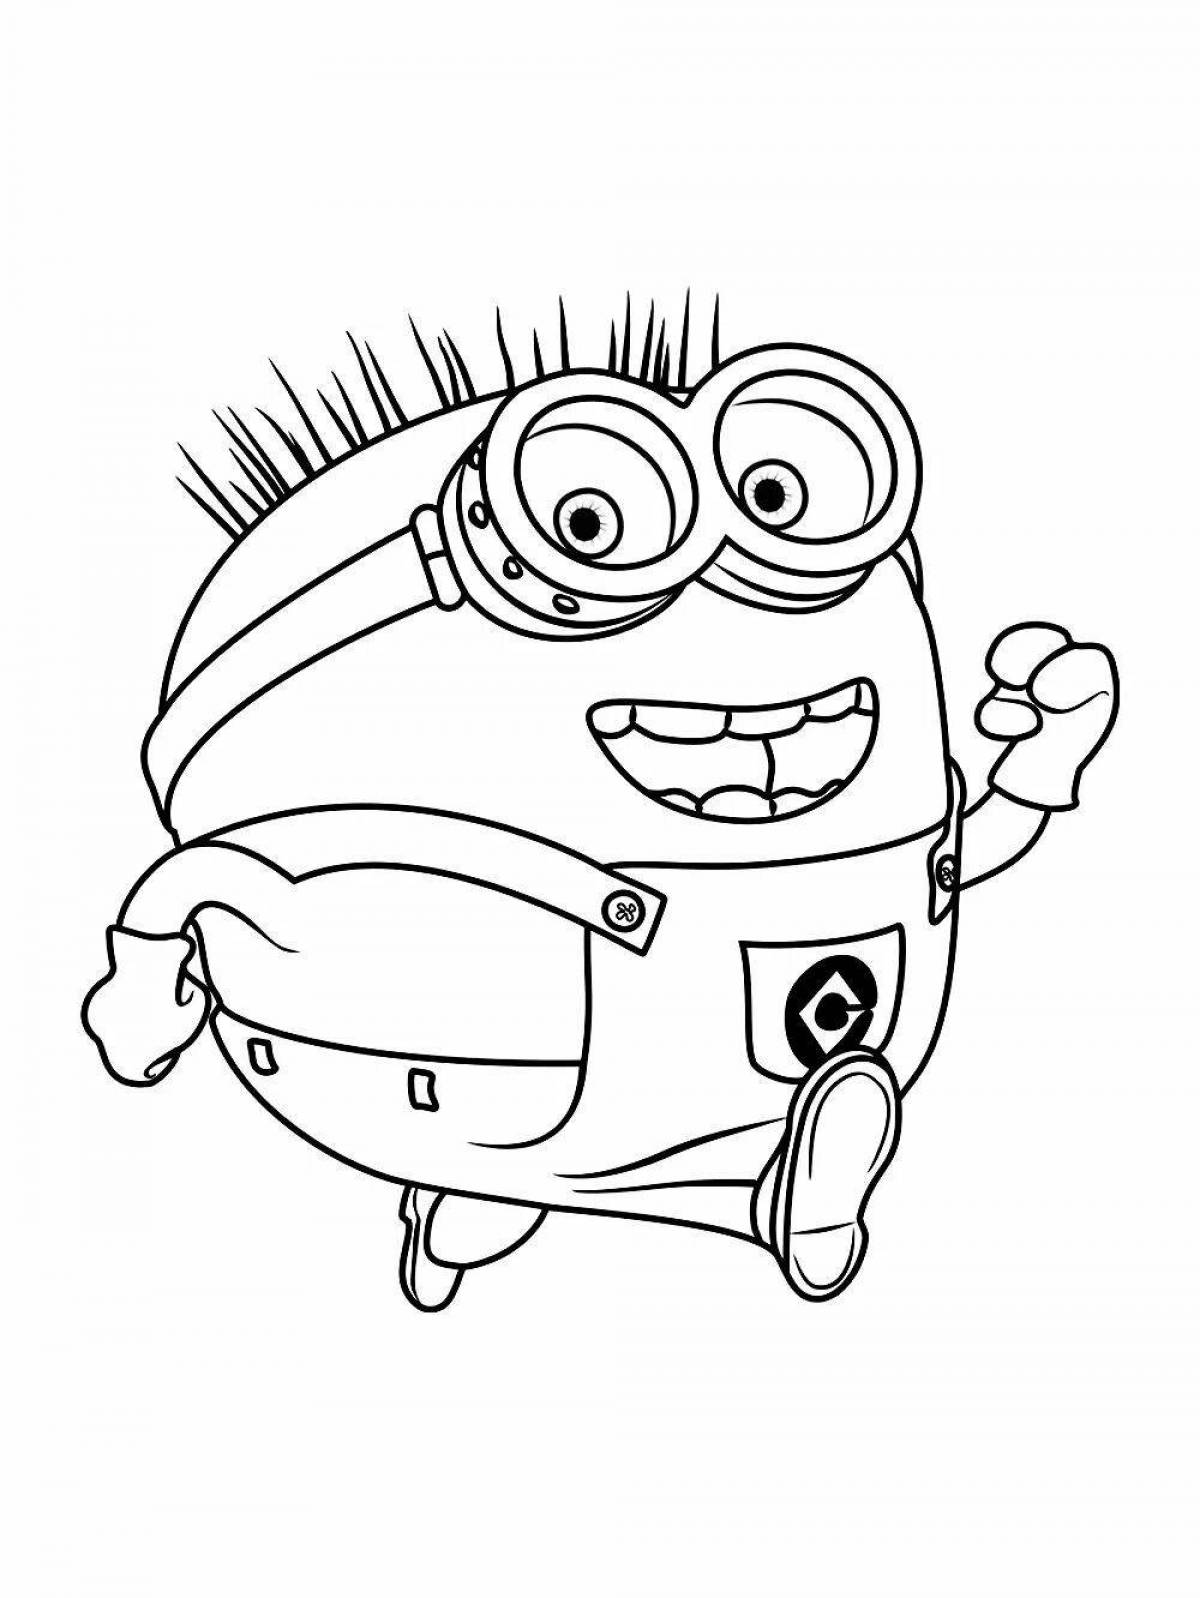 Fancy coloring minion for kids